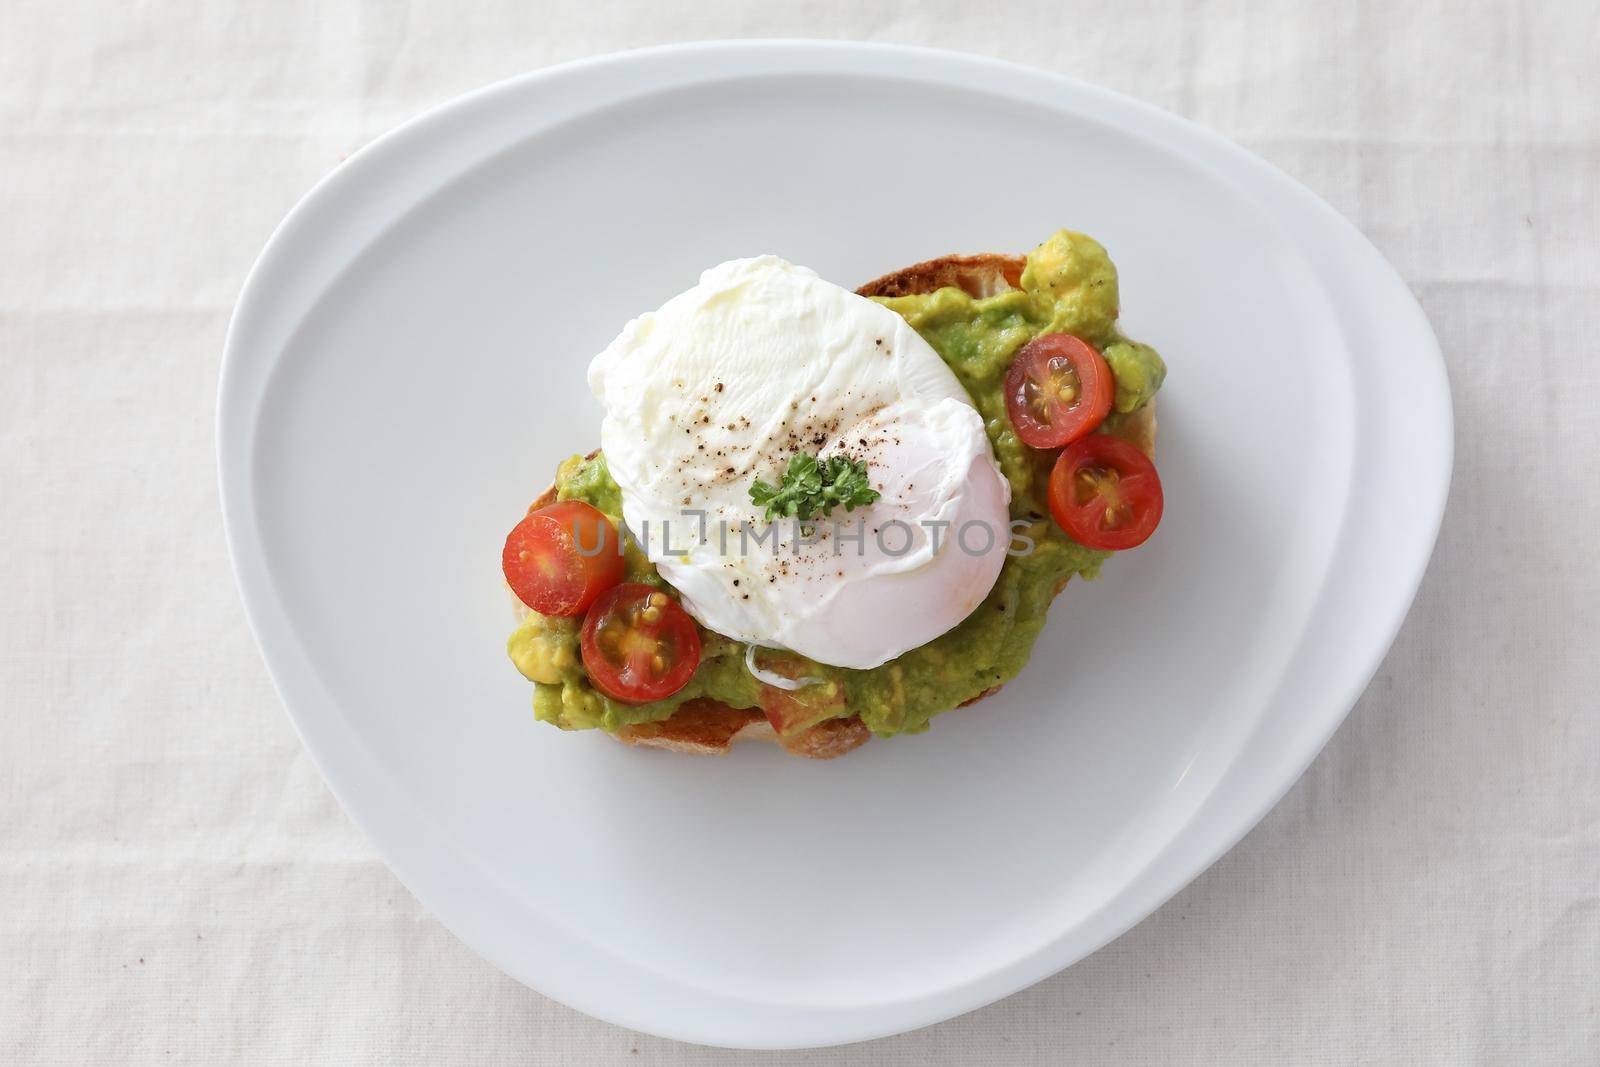 Poached eggs with avocado on toast in white background by piyato